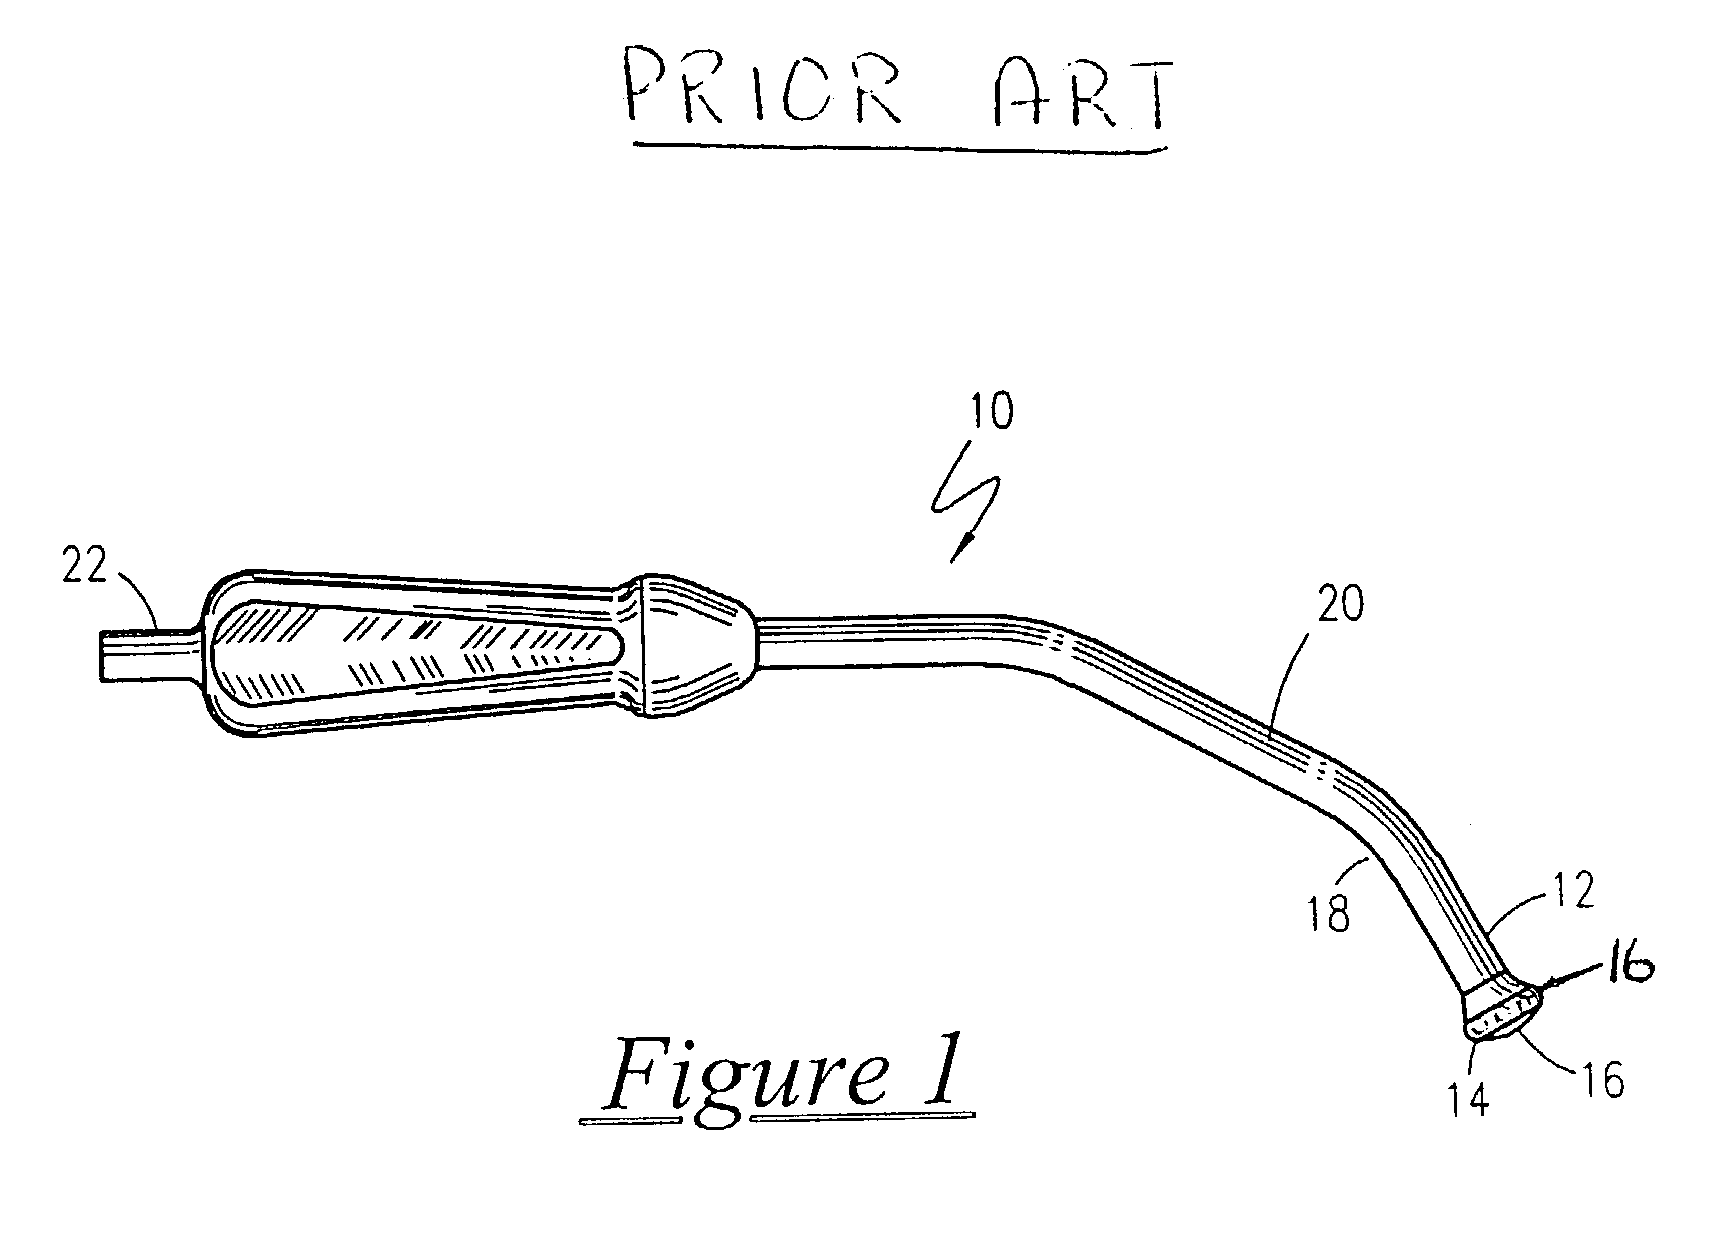 Human airway clearing tool